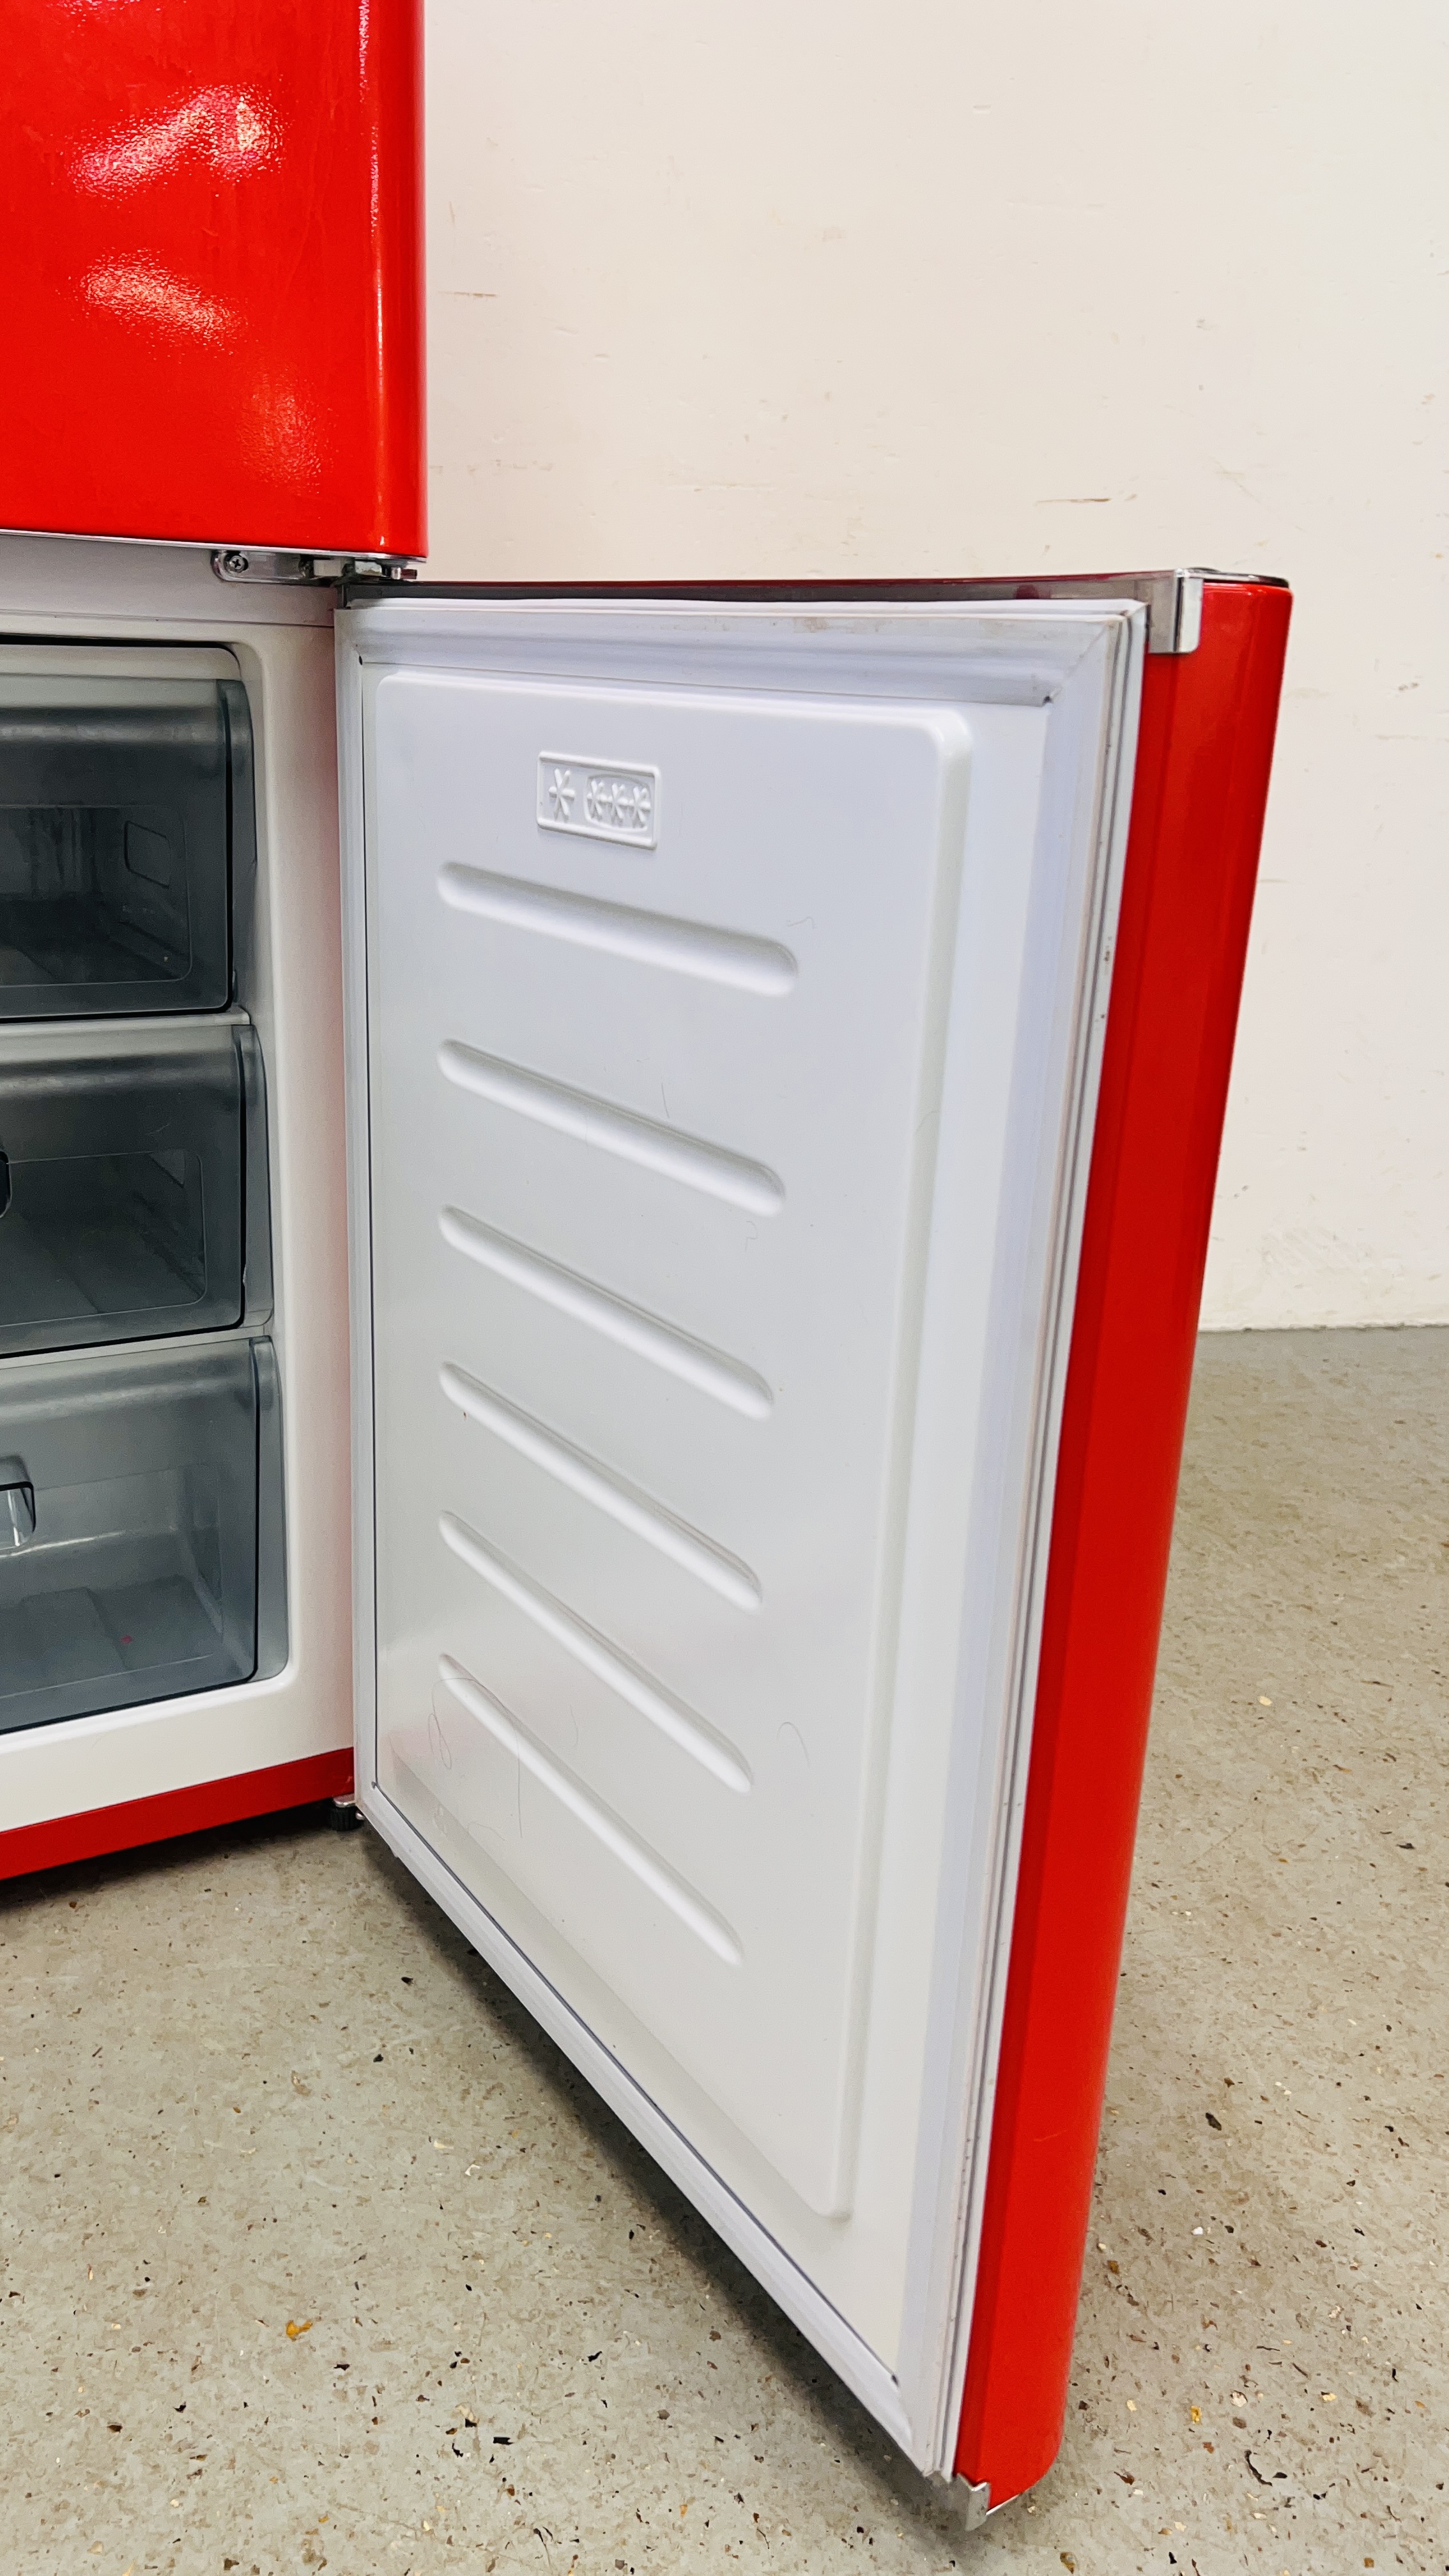 A SWAN RETRO STYLE RED FINISH FRIDGE FREEZER - SOLD AS SEEN. - Image 13 of 13